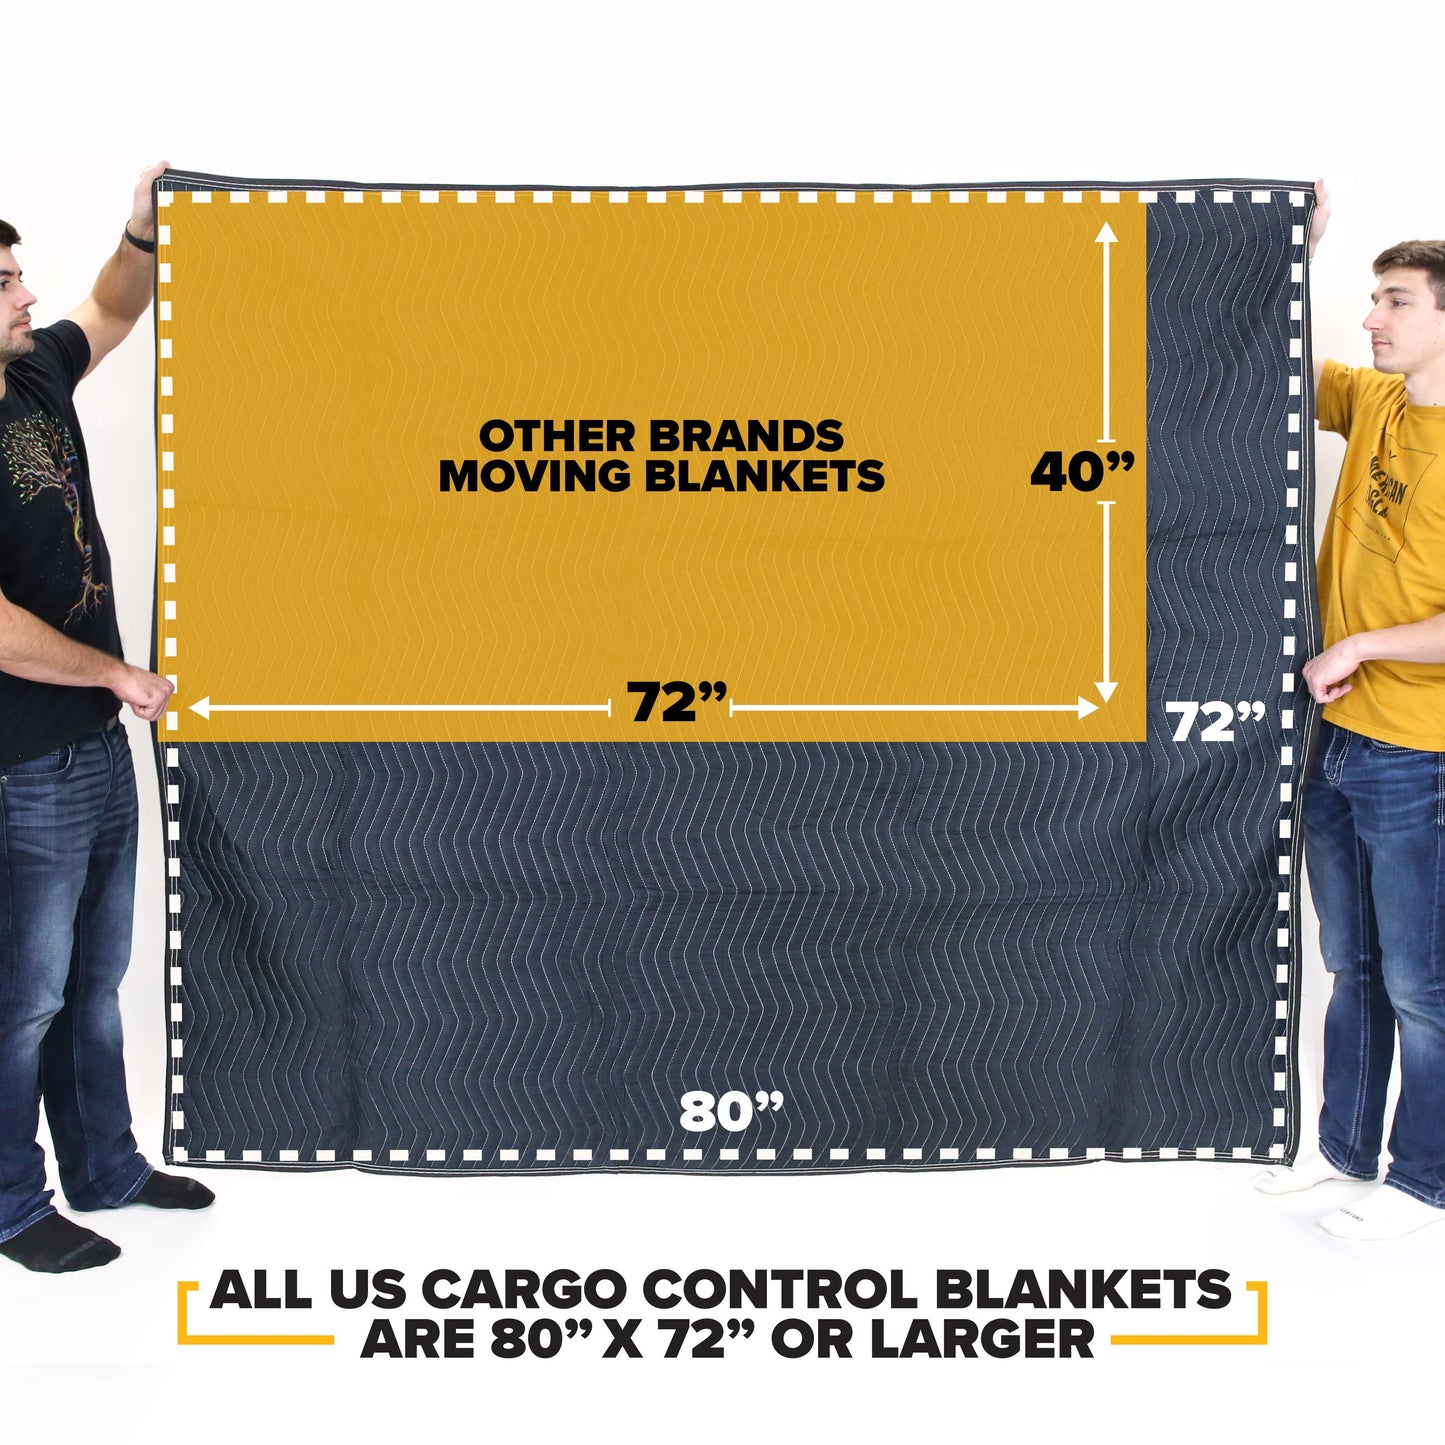 Moving Blanket- Multi Mover image 4 of 11